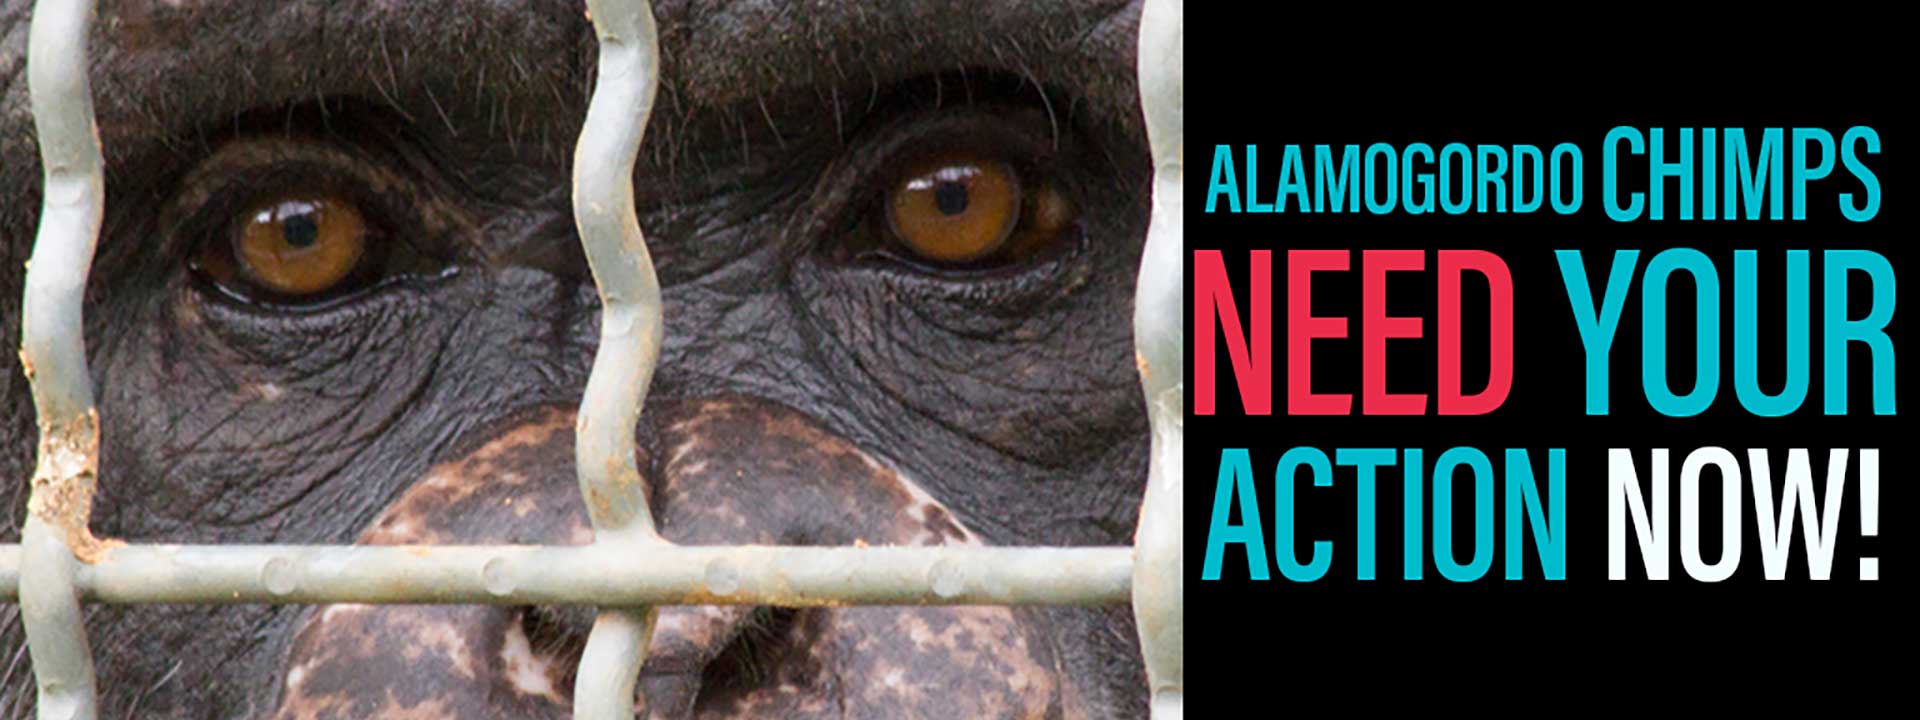 Chimps Need Your Action NOW